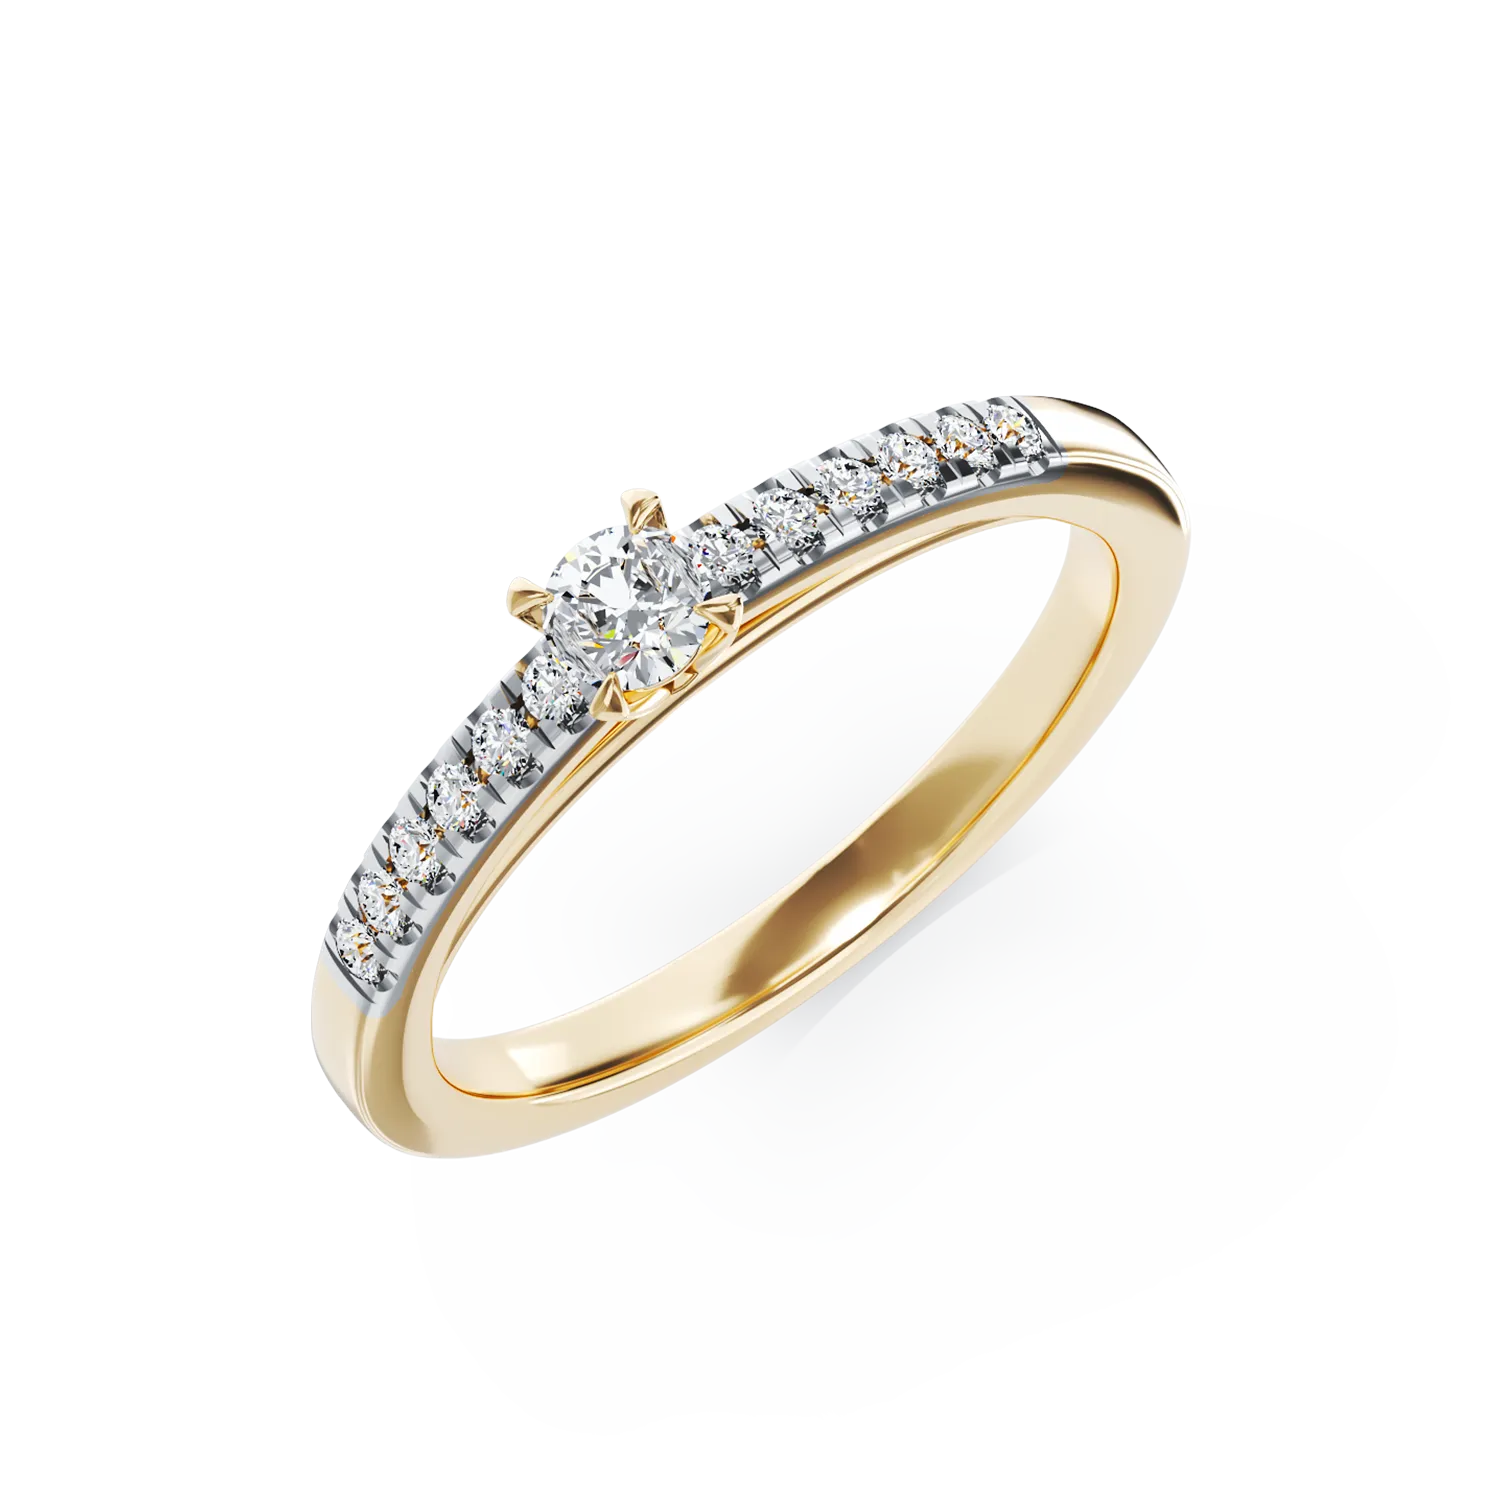 18K yellow gold engagement ring with 0.31ct diamond and 0.13ct diamonds